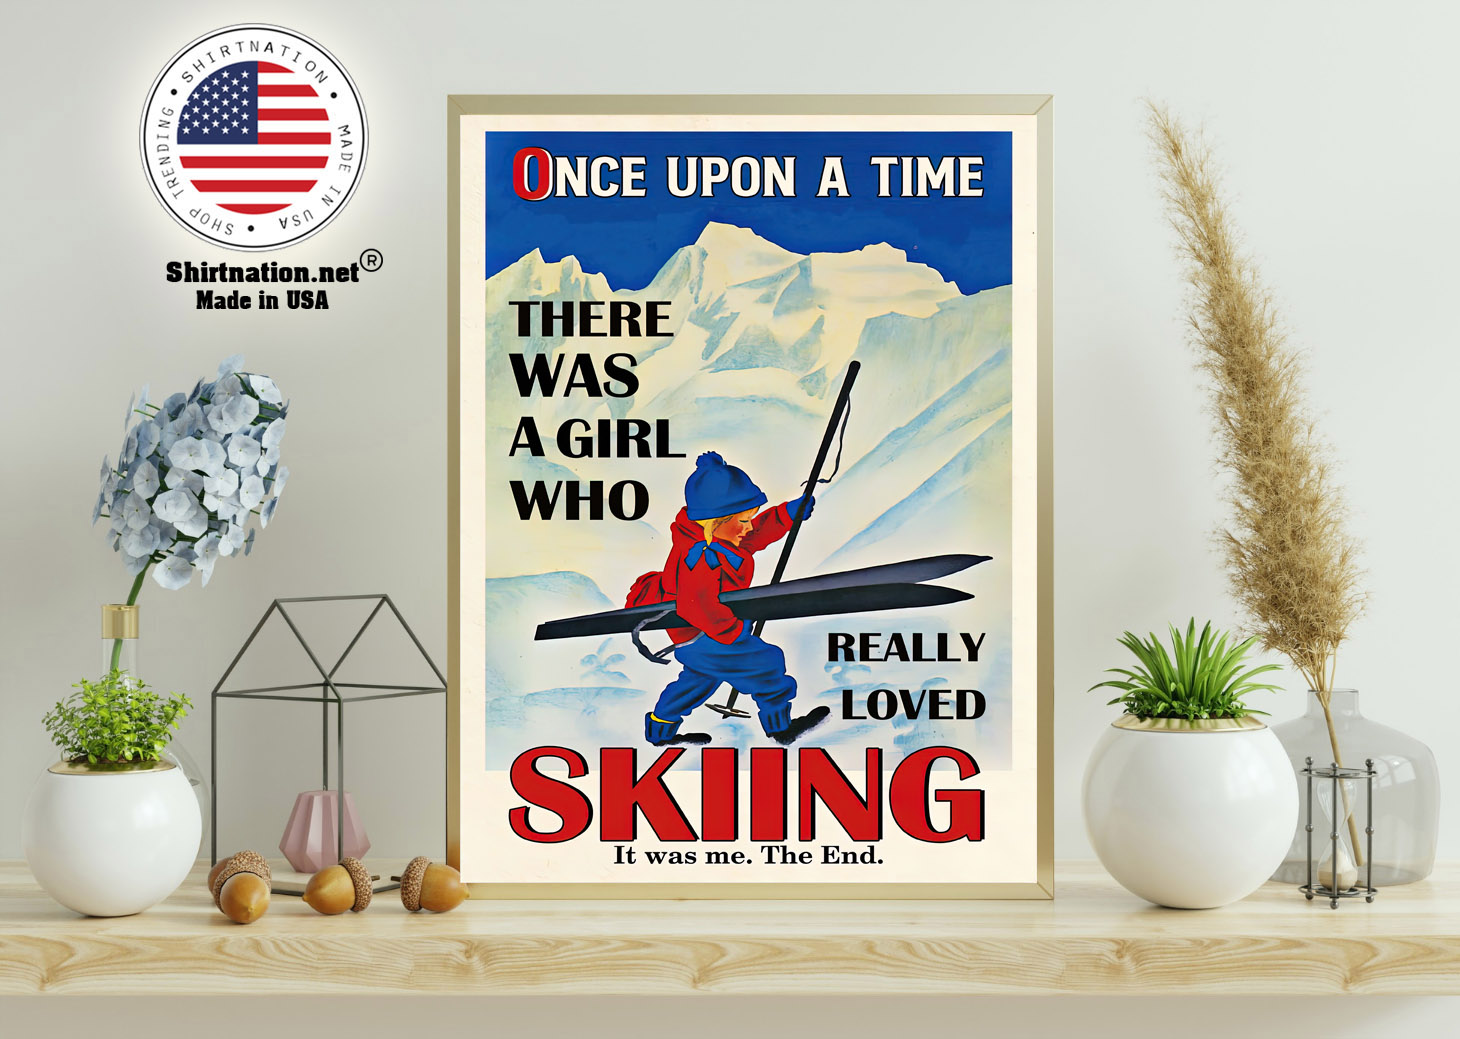 Once upon a time there was a girl who really loved skiing poster 11